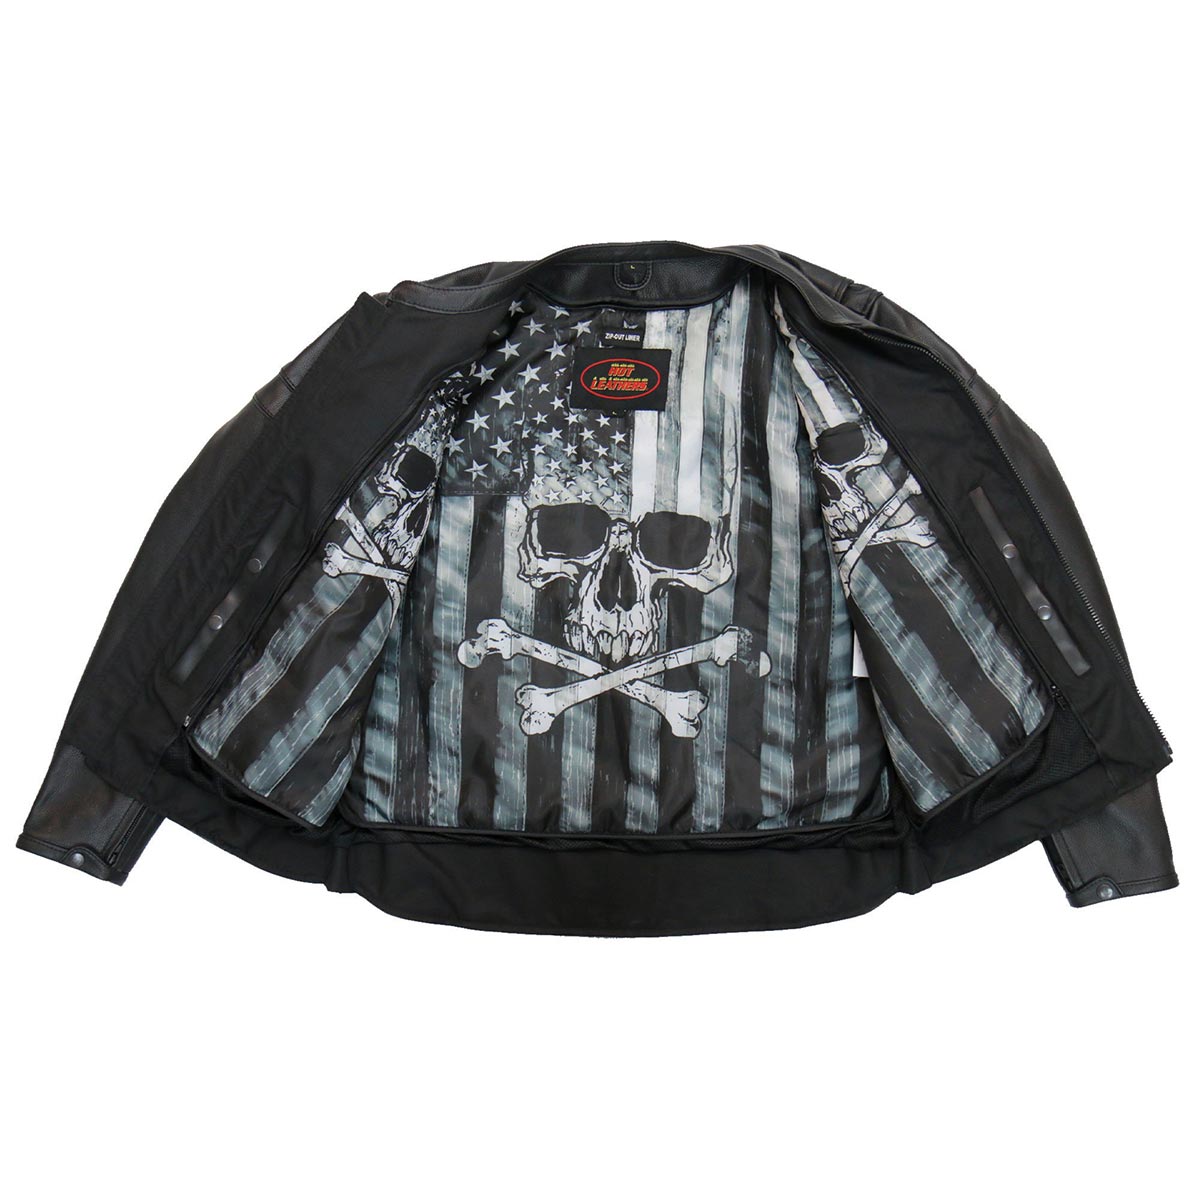 Hot Leathers JKM1032 Men’s Black ‘Skull Flag' Printed Leather Jacket with Concealed Carry Pockets